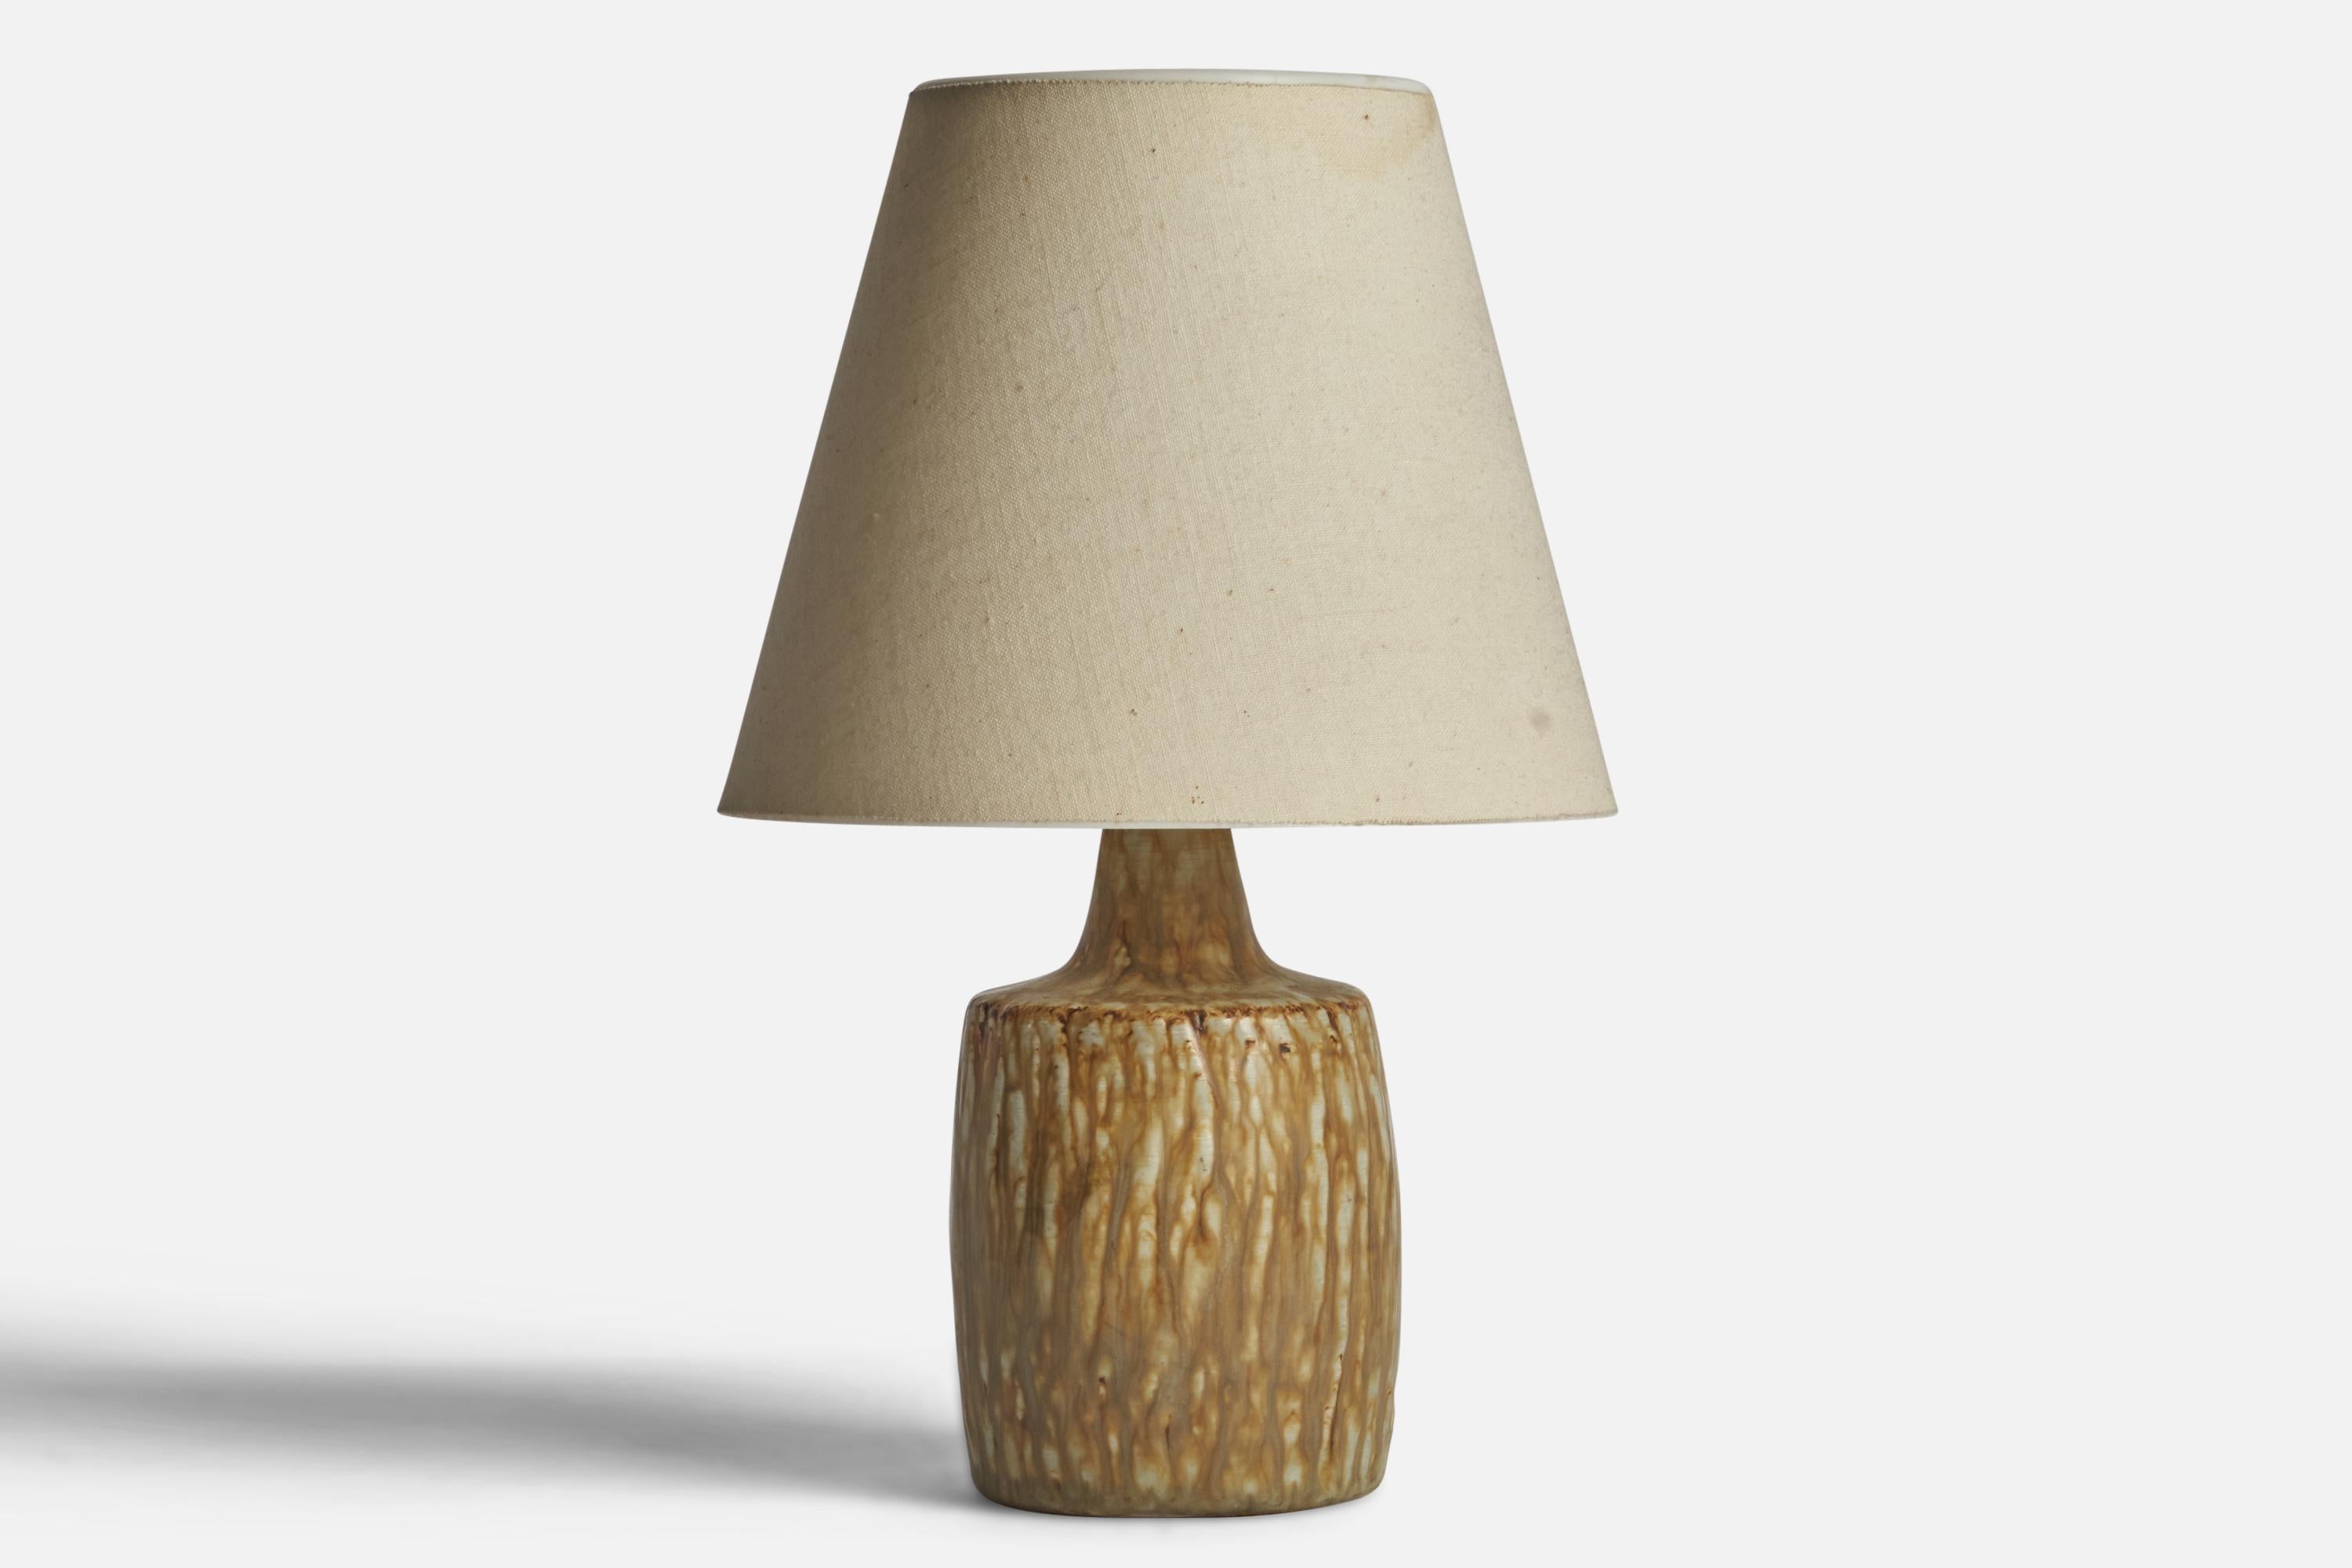 A grey-beige-glazed stoneware table lamp designed by Gunnar Nylund and produced by Rörstrand, Sweden, 1940s.

Dimensions of Lamp (inches): 7.5” H x 3.25” Diameter
Dimensions of Shade (inches): 3.5” Top Diameter x 6.5” Bottom Diameter x 5.5”